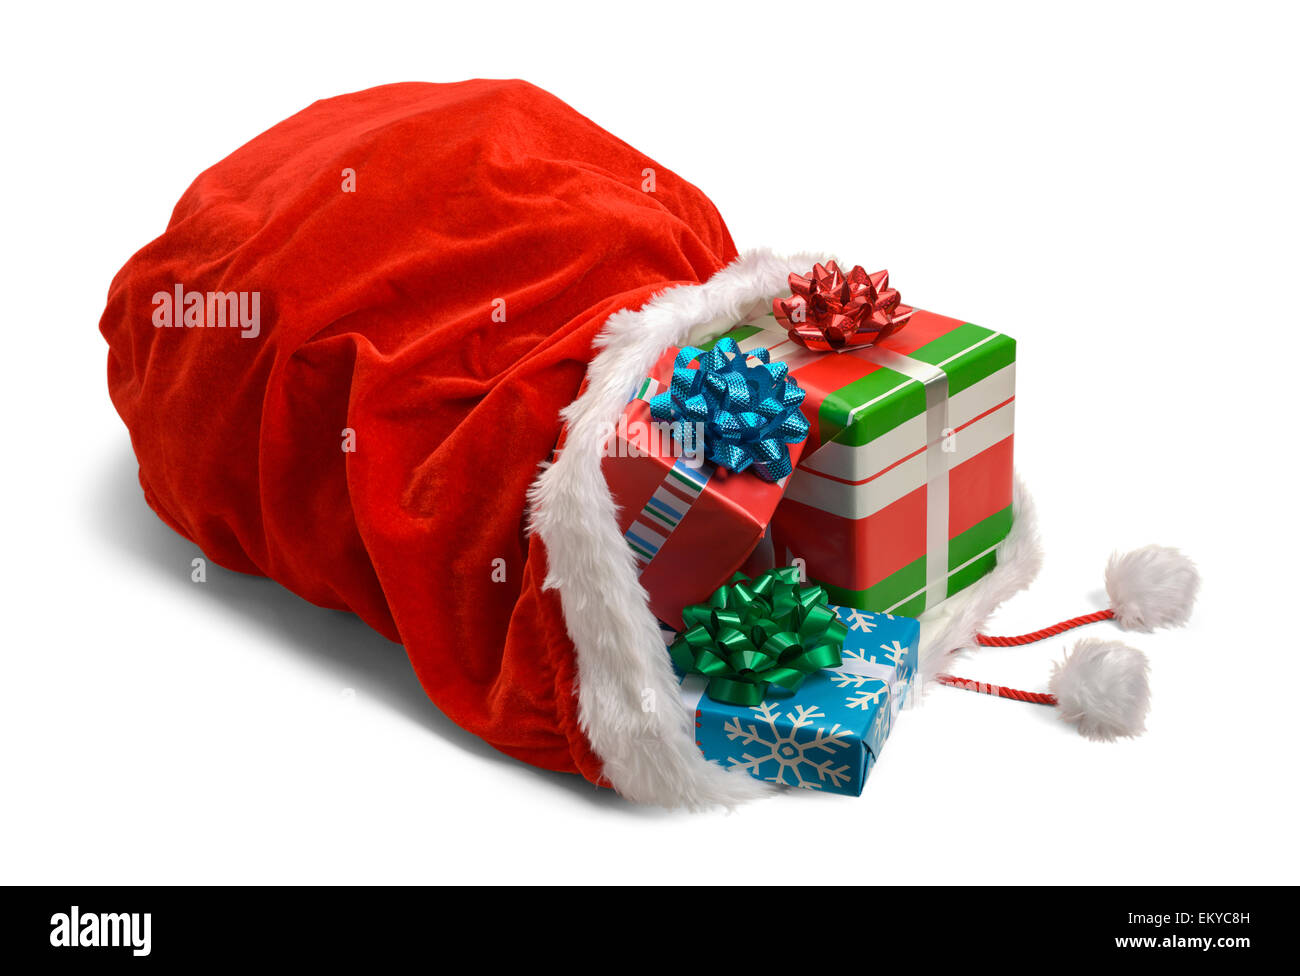 Santa Bag on Side with Presents Coming Out Isolated on White Background. Stock Photo